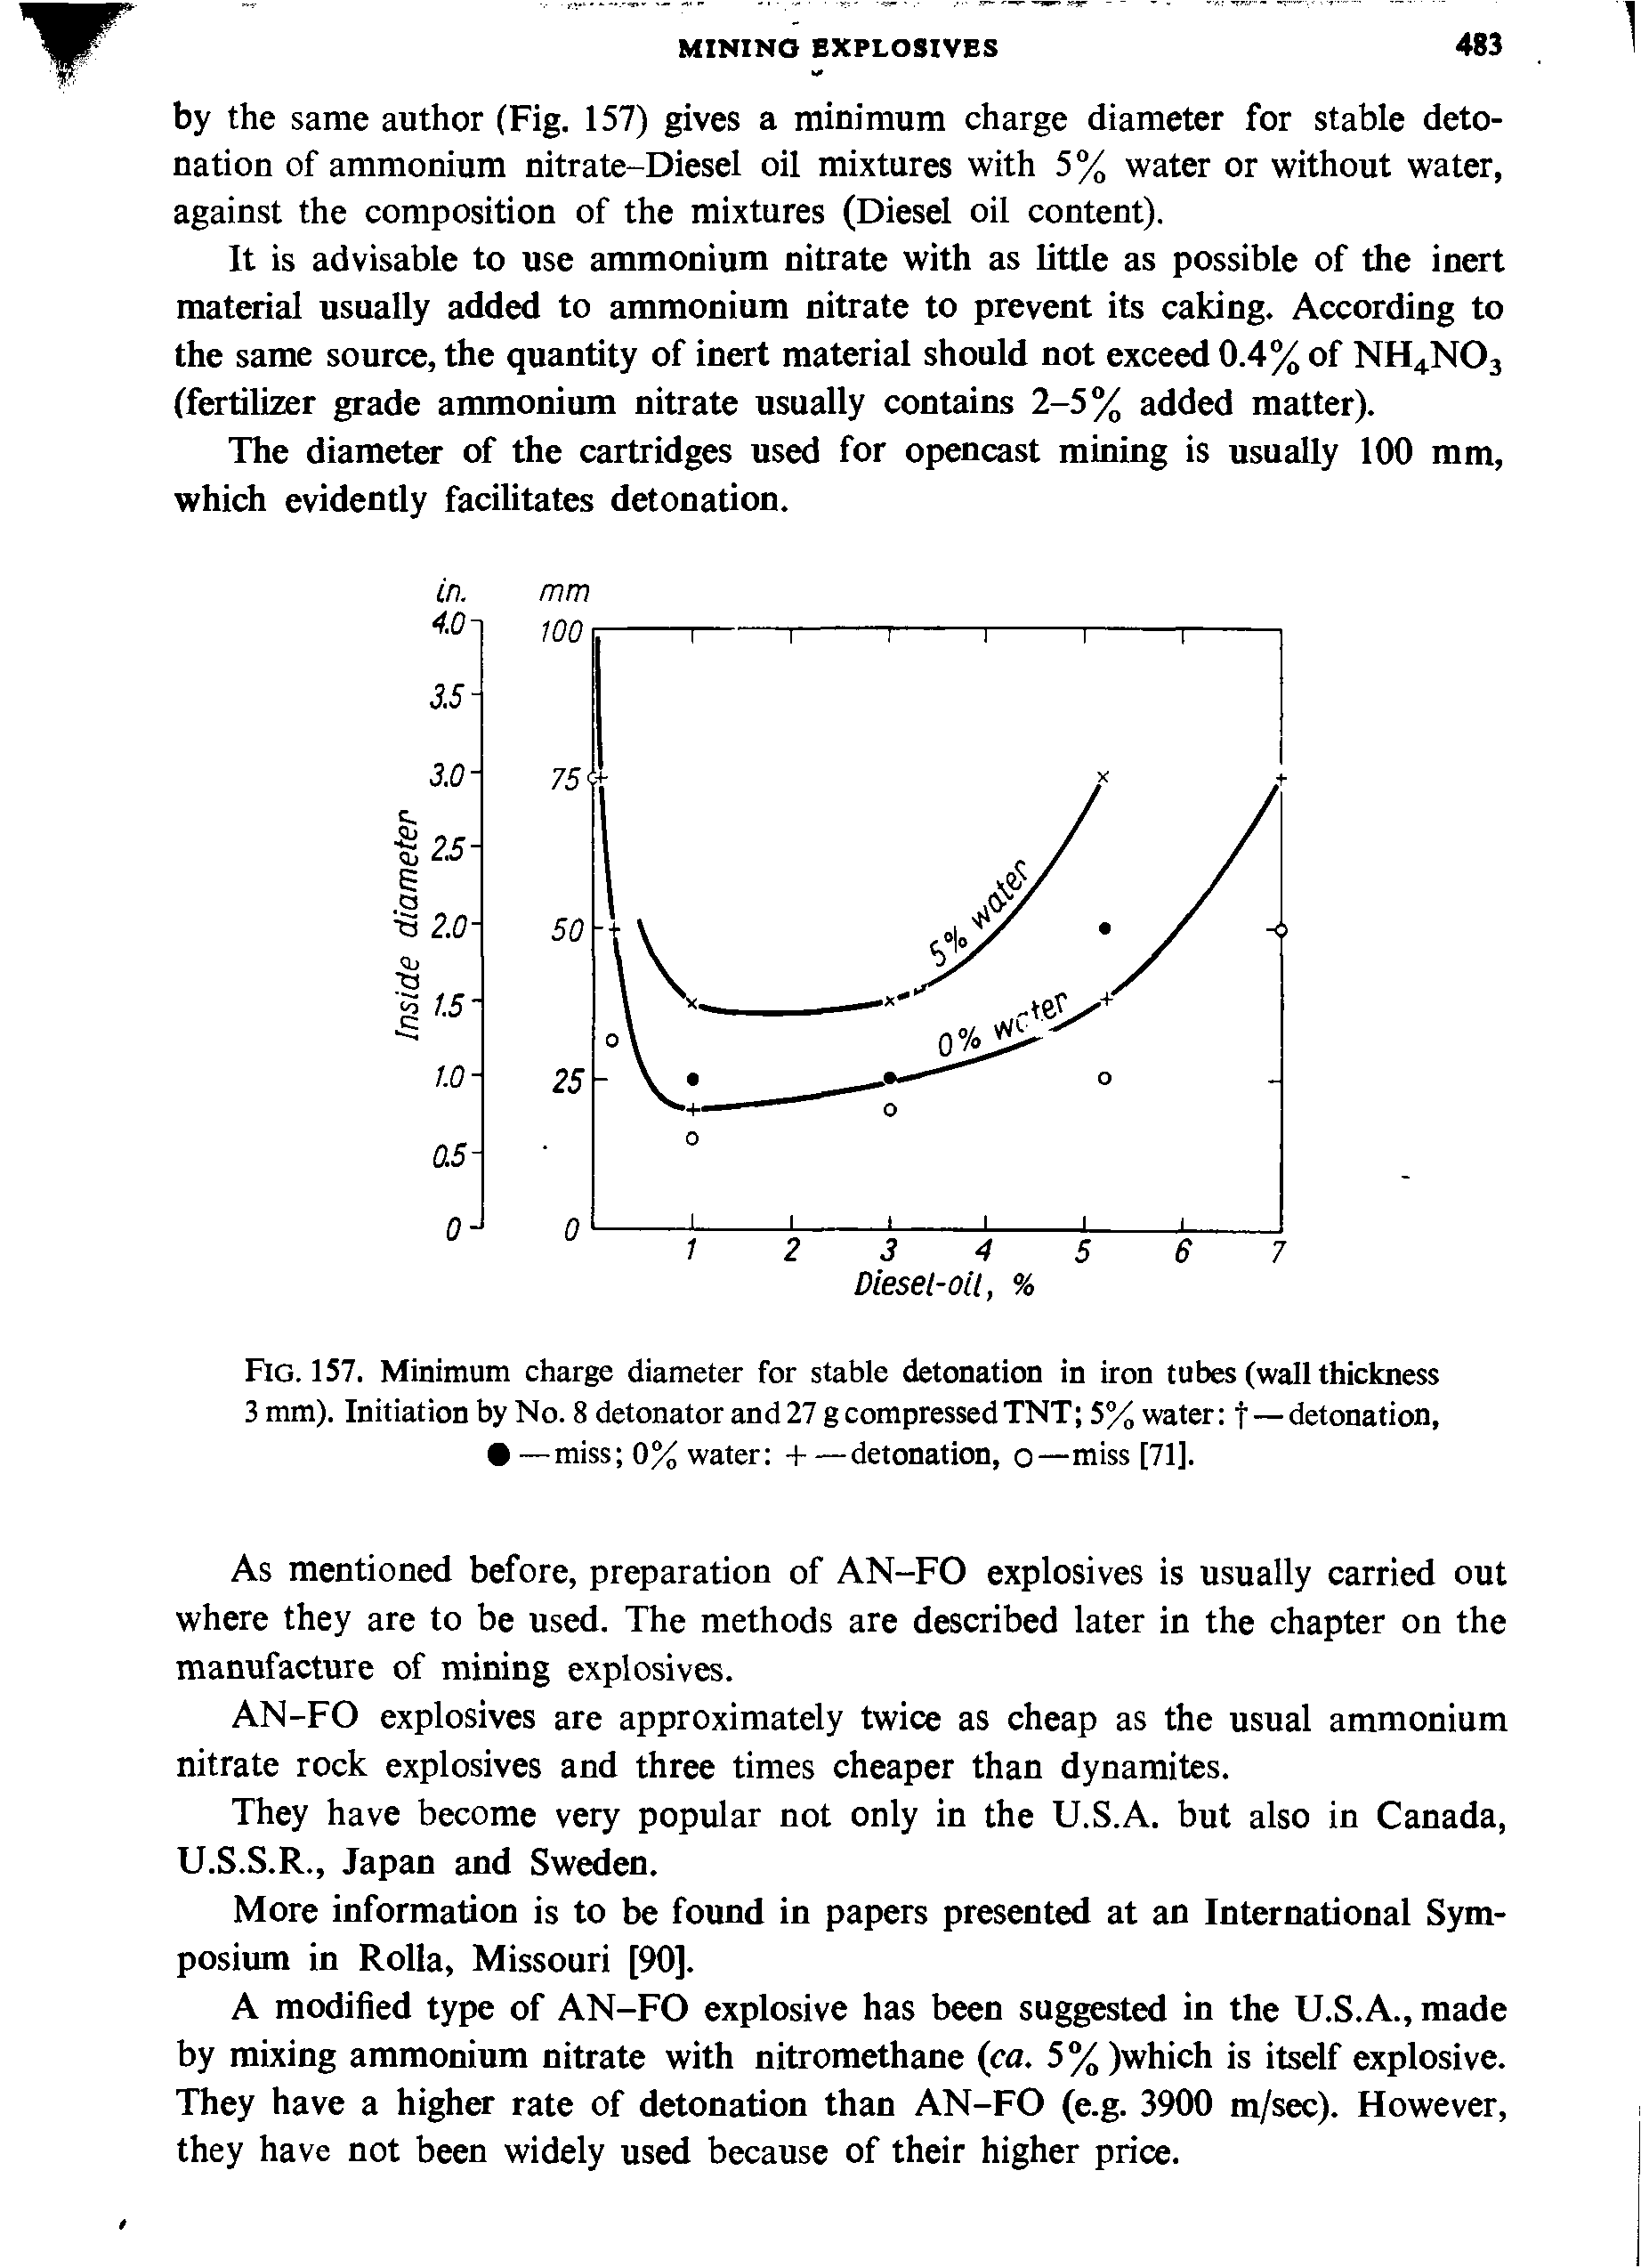 Fig. 157. Minimum charge diameter for stable detonation in iron tubes (wall thickness 3 mm). Initiation by No. 8 detonator and 27 g compressed TNT 5% water f — detonation, —miss 0% water H------------------------detonation, o—miss [71].